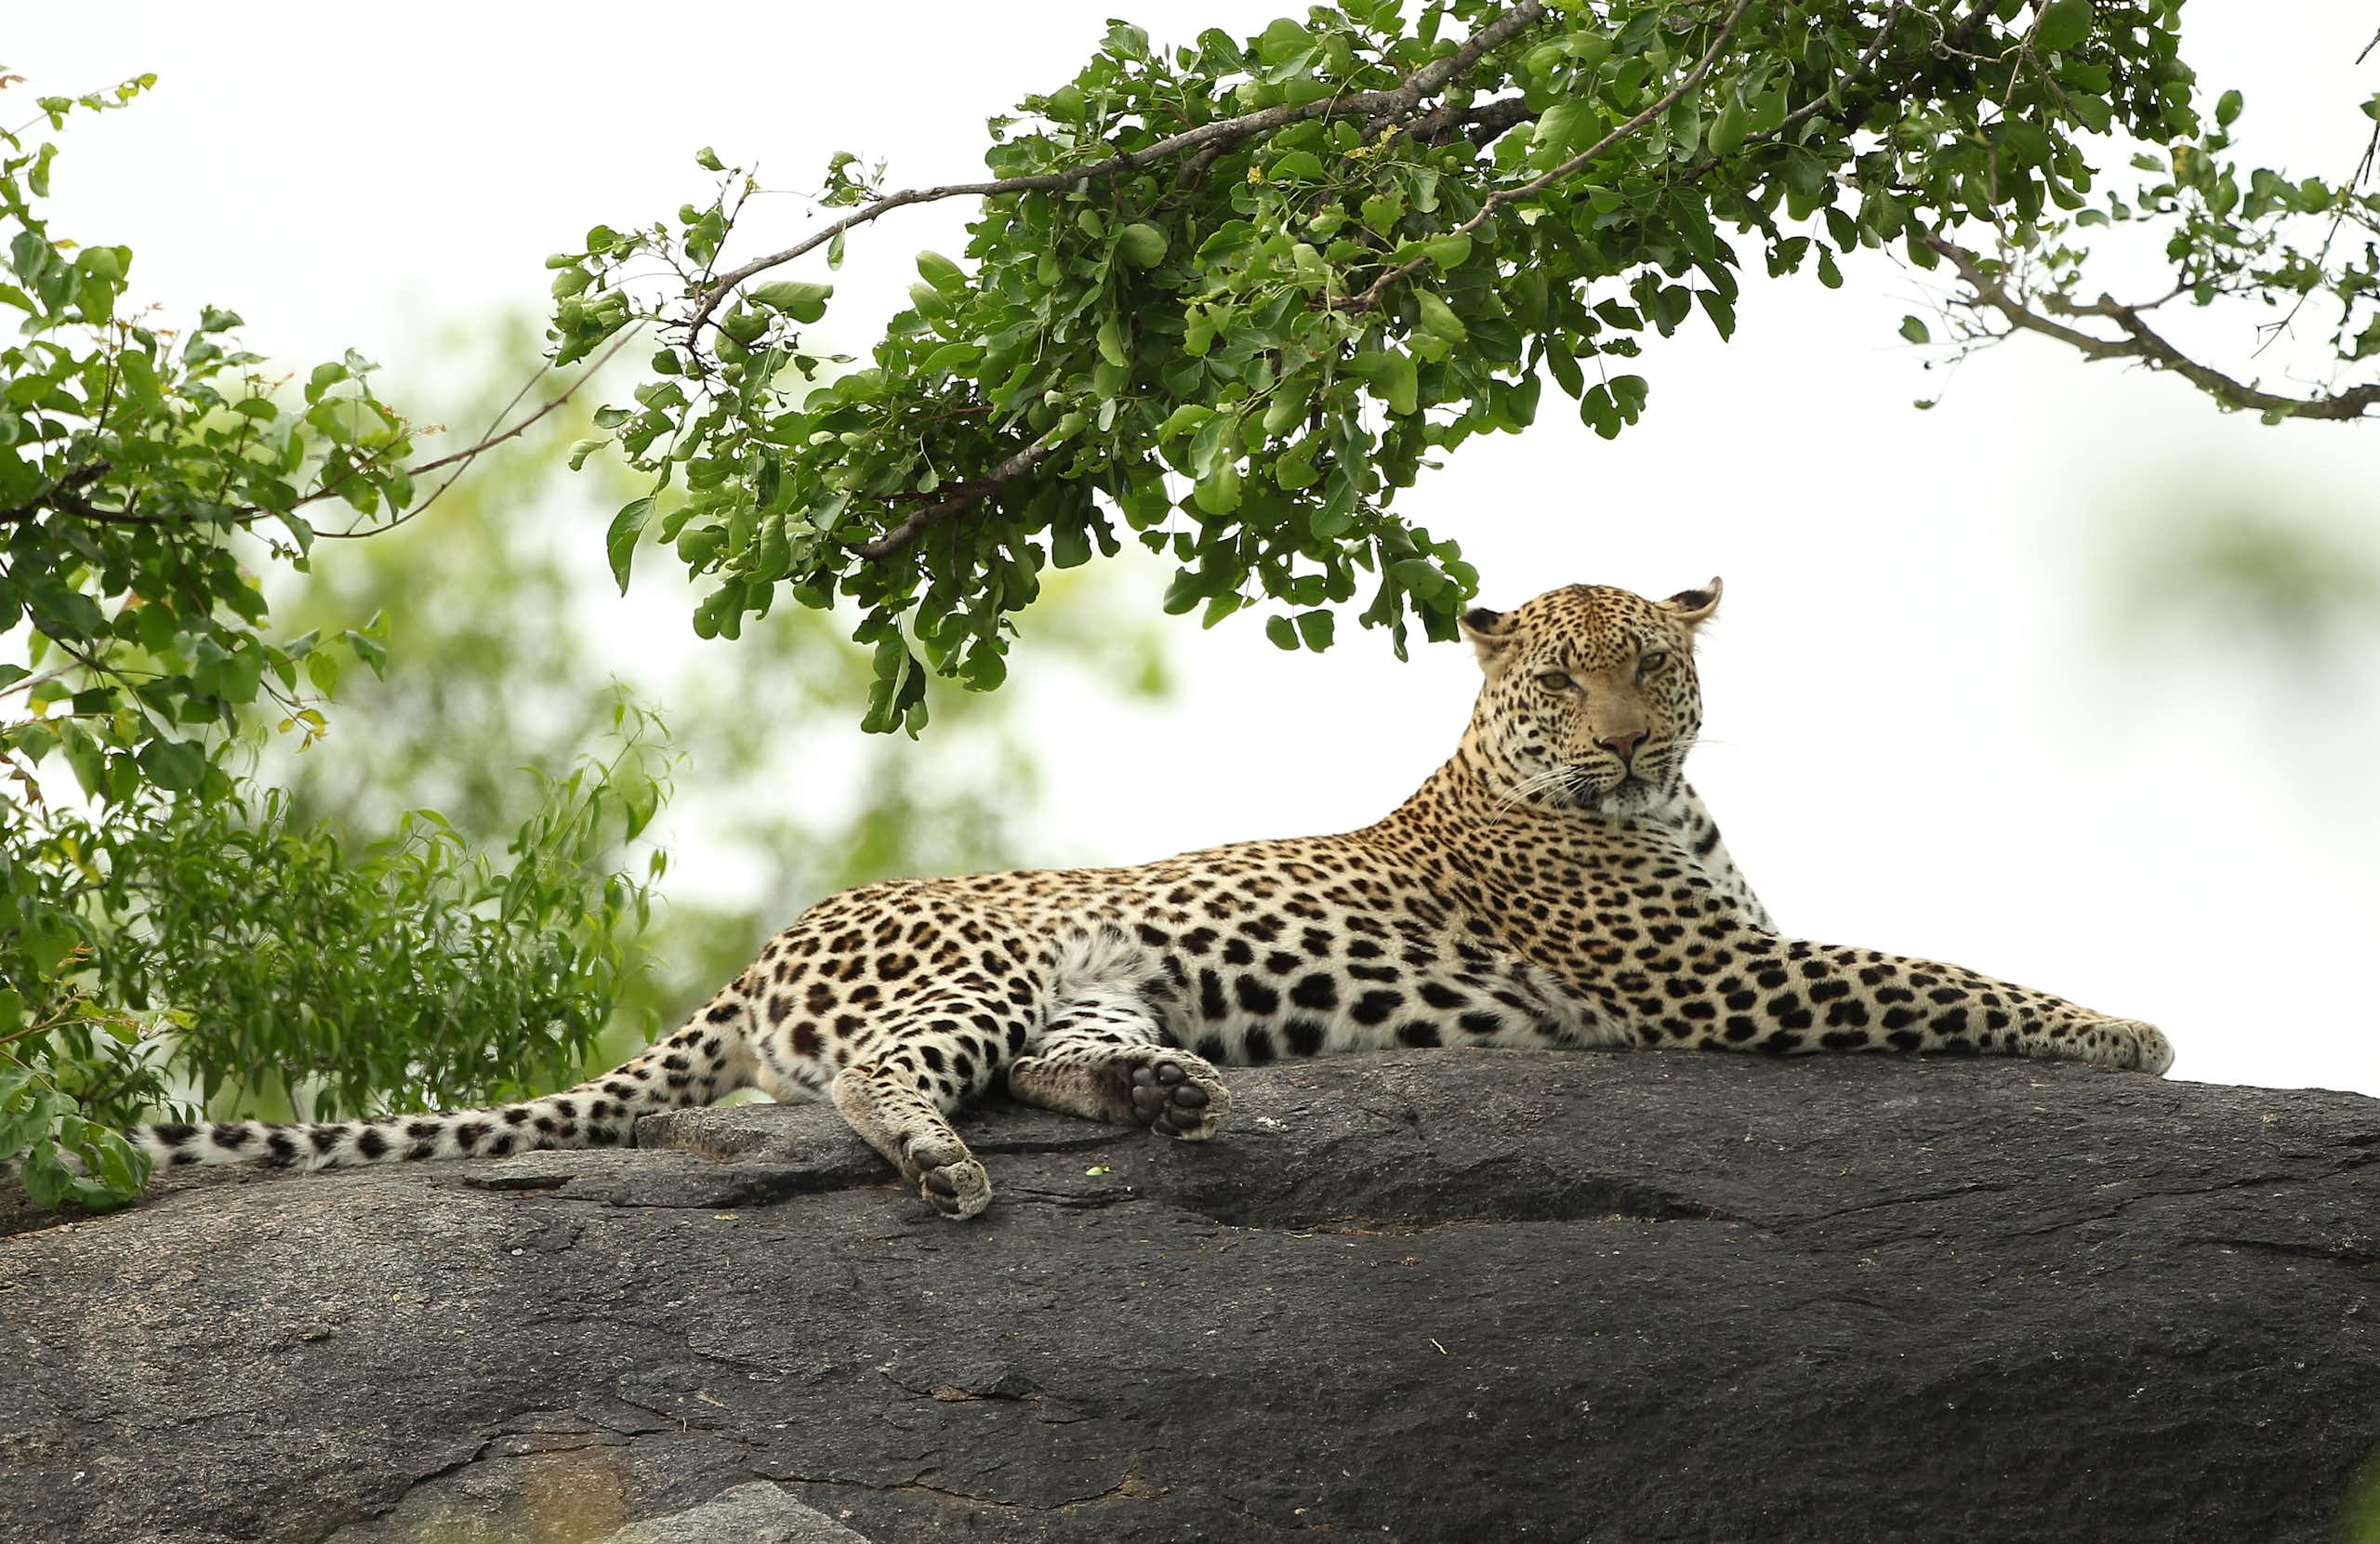 An adult leopard stretches out on a rock under a tree